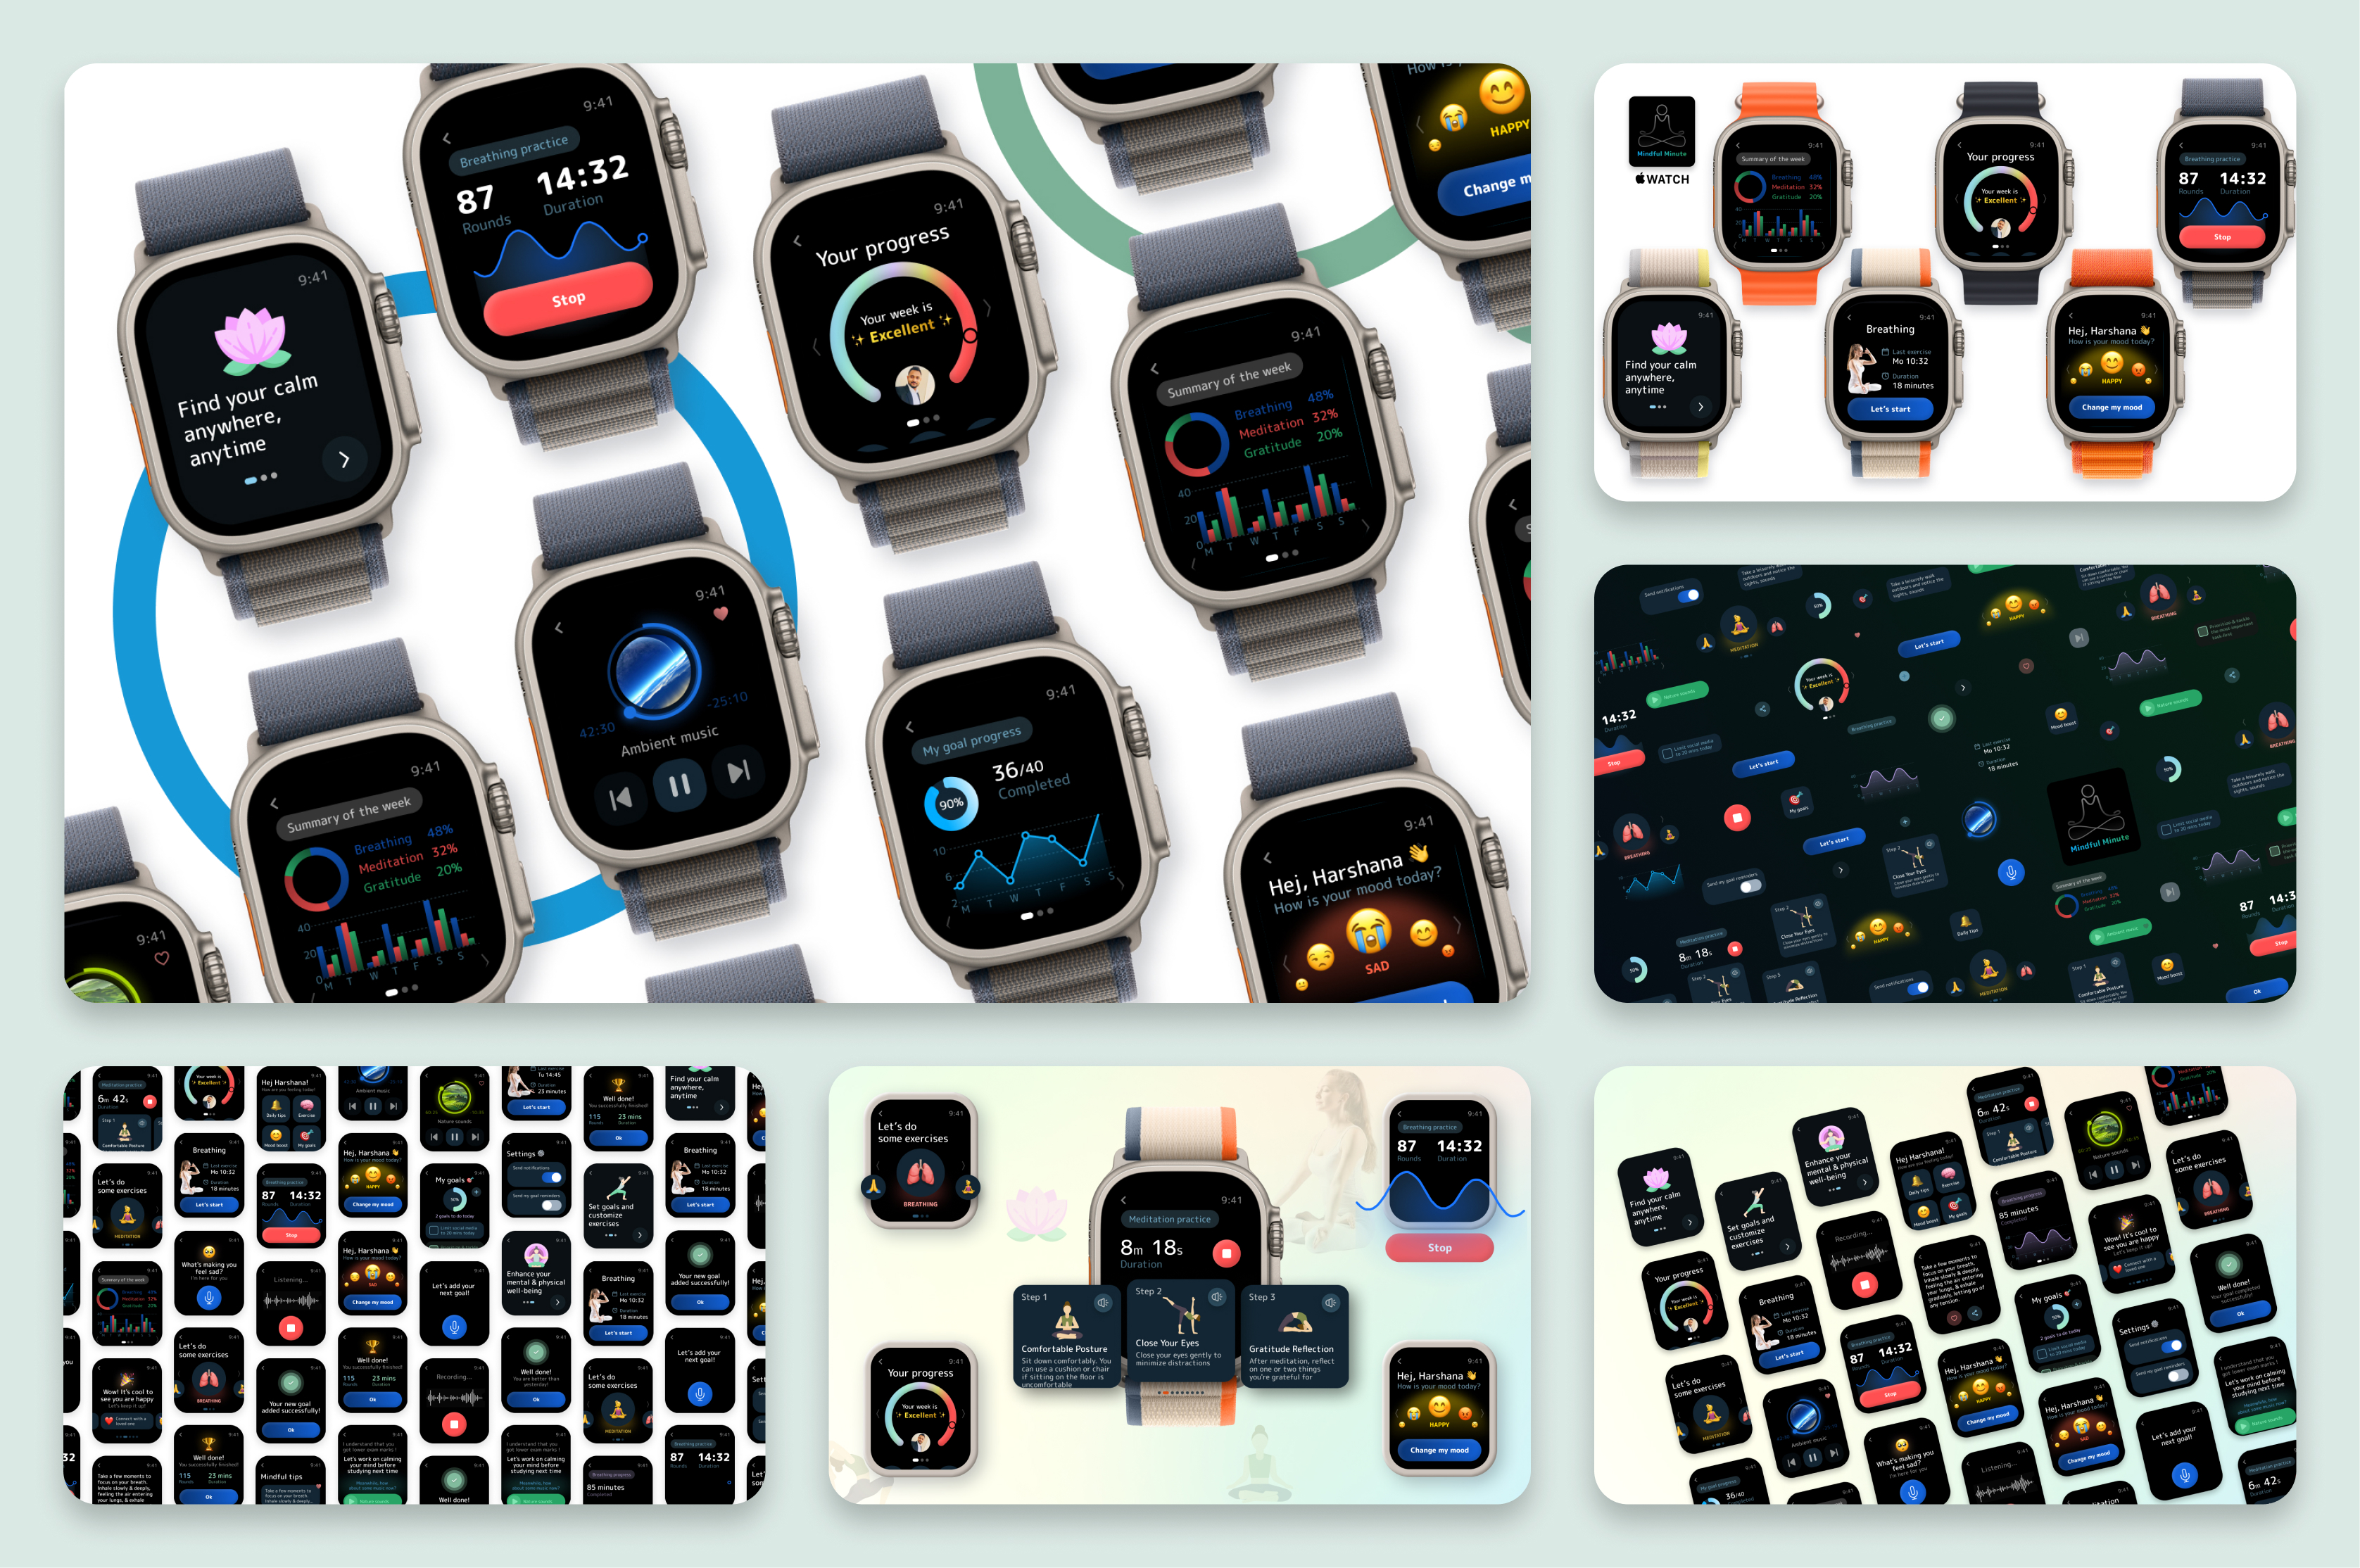 UI UX Case study 2 for Apple WatchOS done by Harshana Gamage